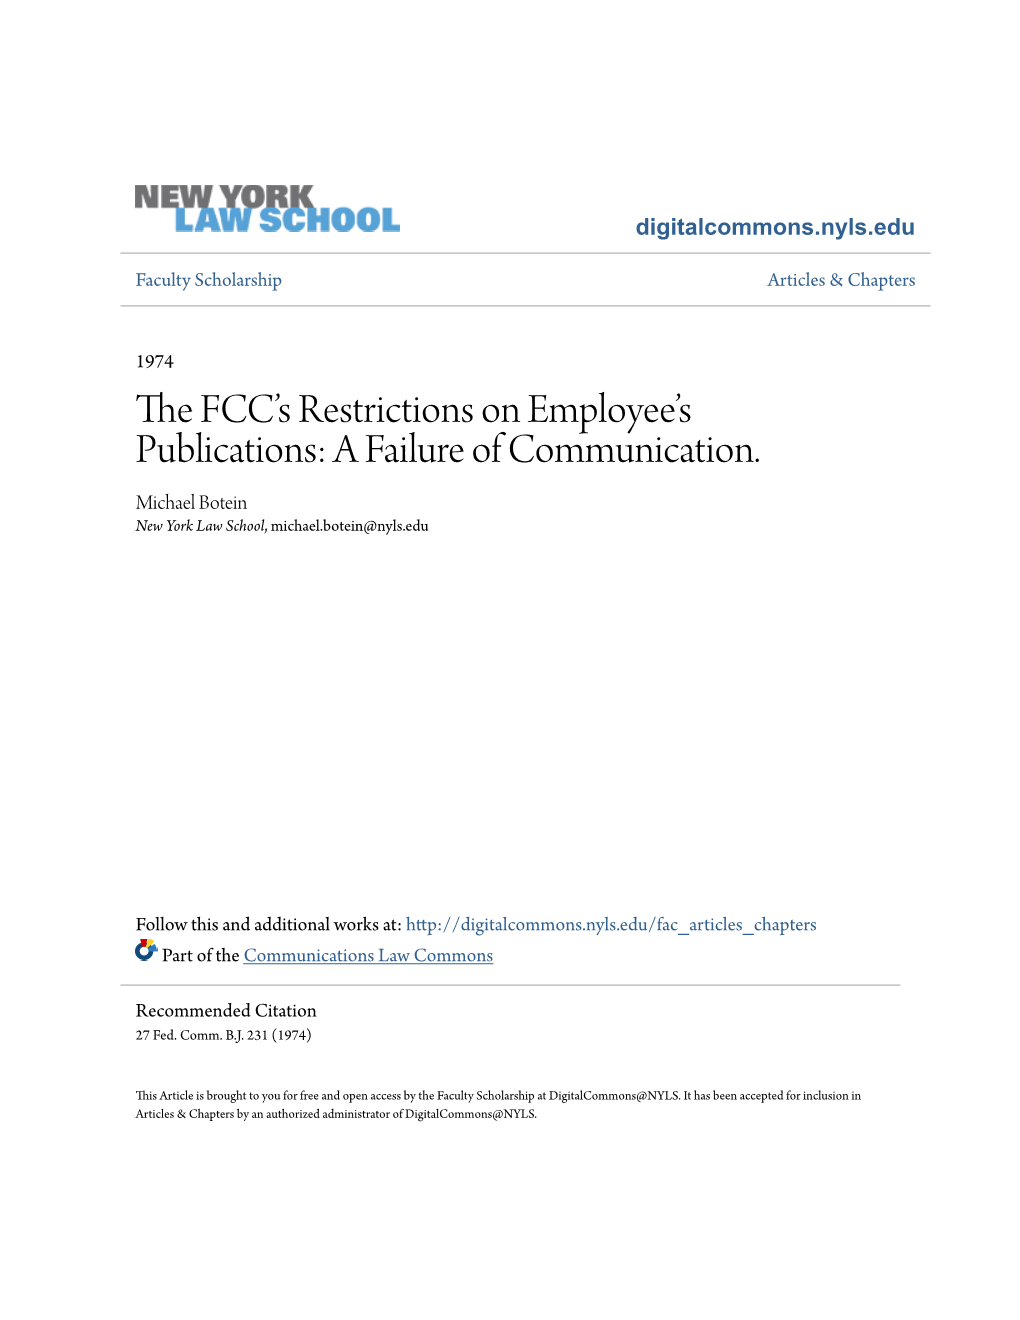 The FCC's Restrictions on Employee's Publications